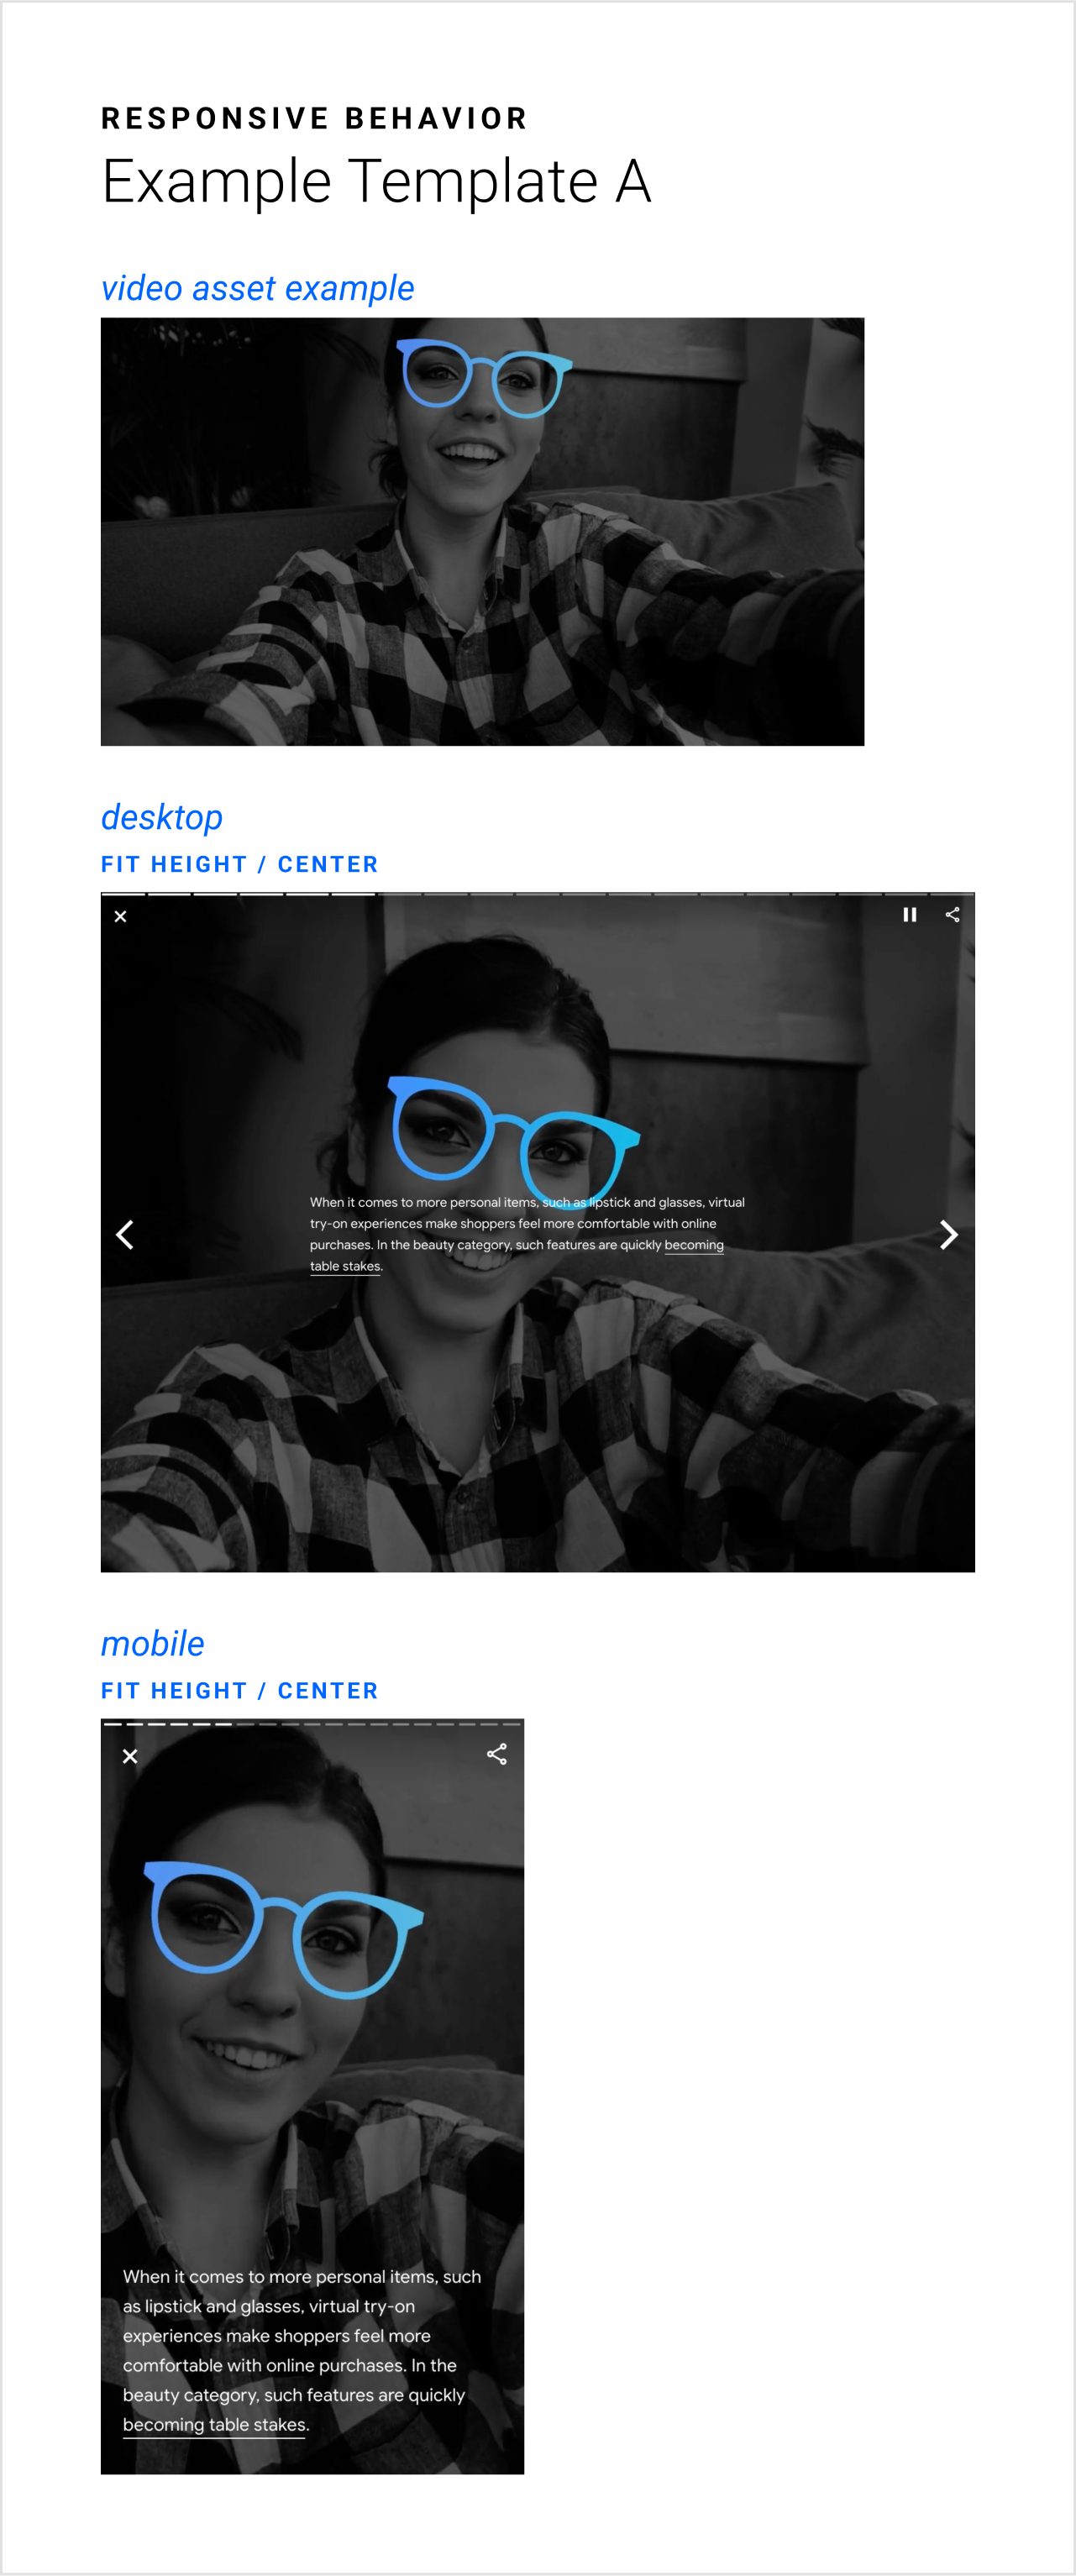 We designed responsive templates to apply to different Visual Story pages. In this example, the video asset fits to the height of the screen and stays centered on both mobile and desktop.